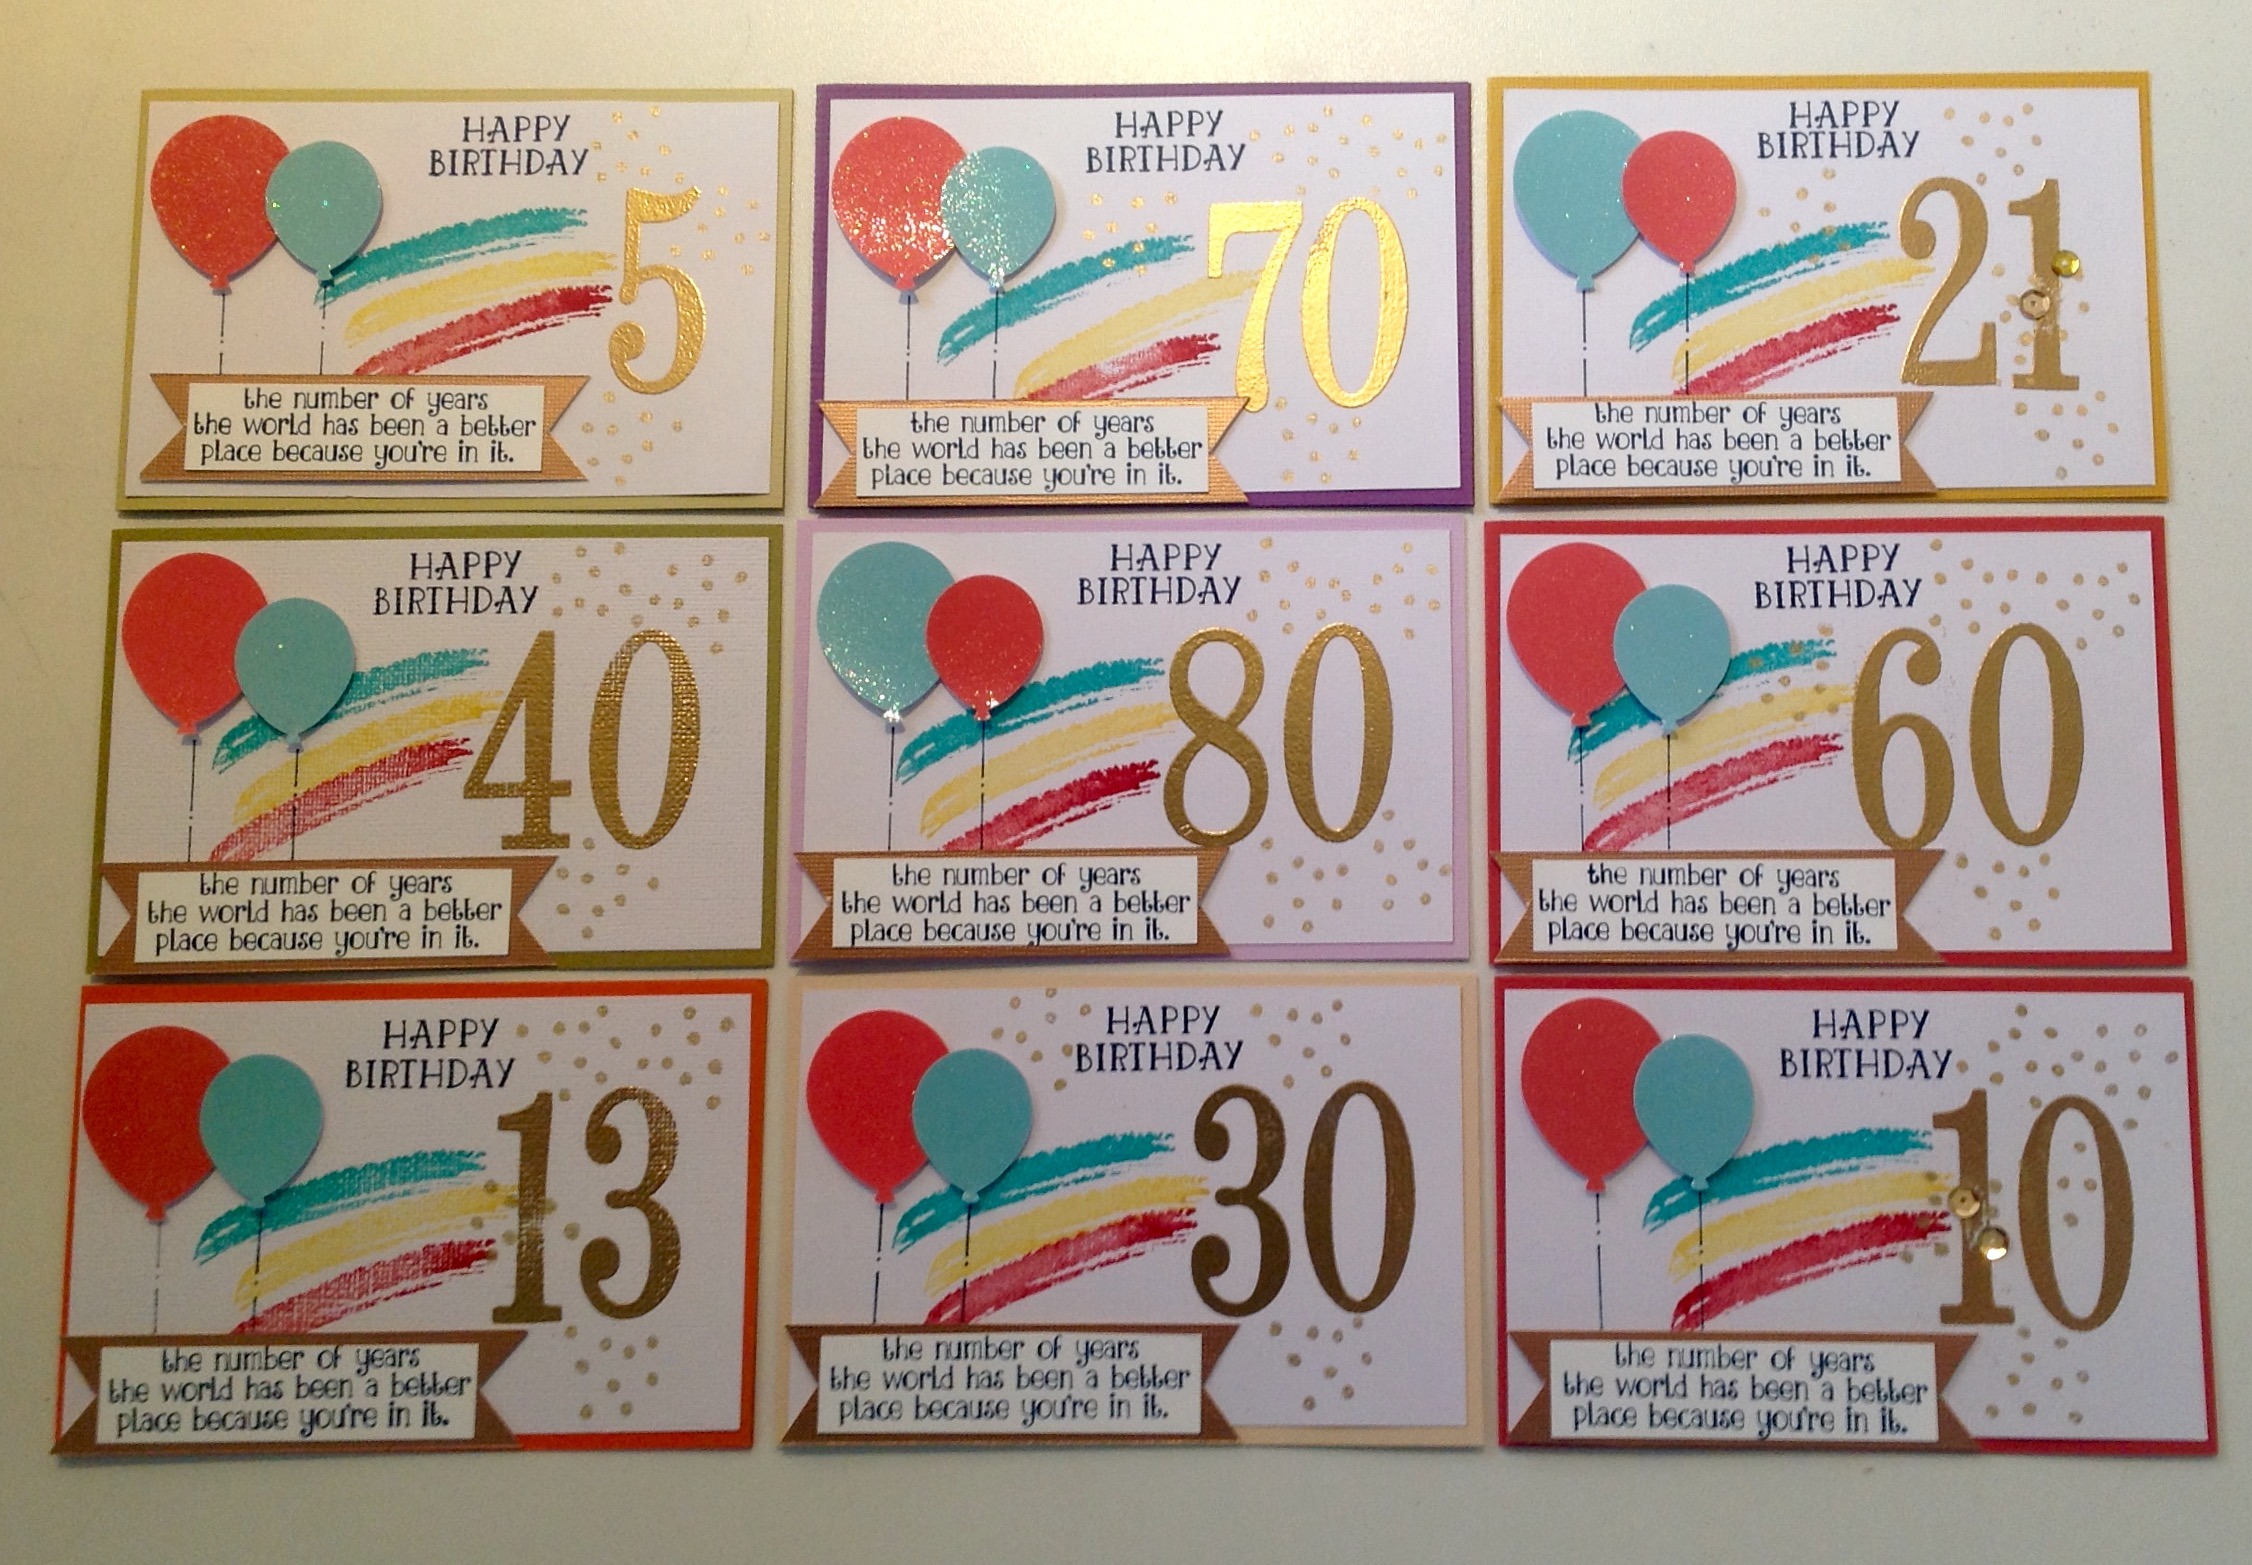 Number of Years stamp set cards